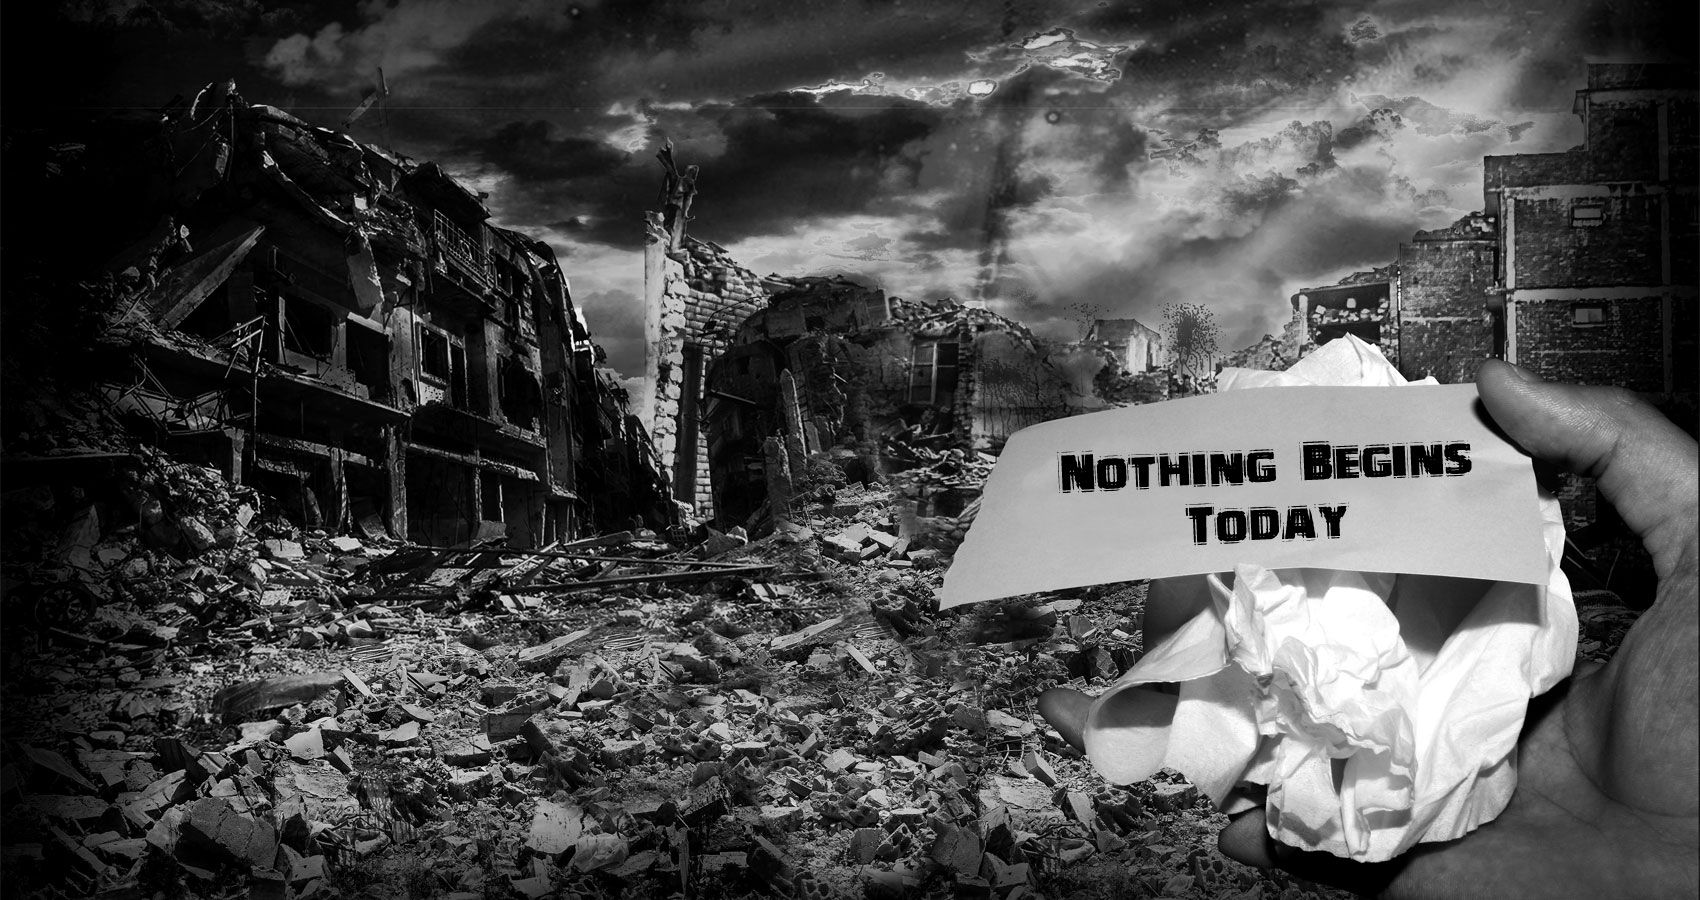 Nothing Begins Today by Beth Tremaglio at Spillwords.com